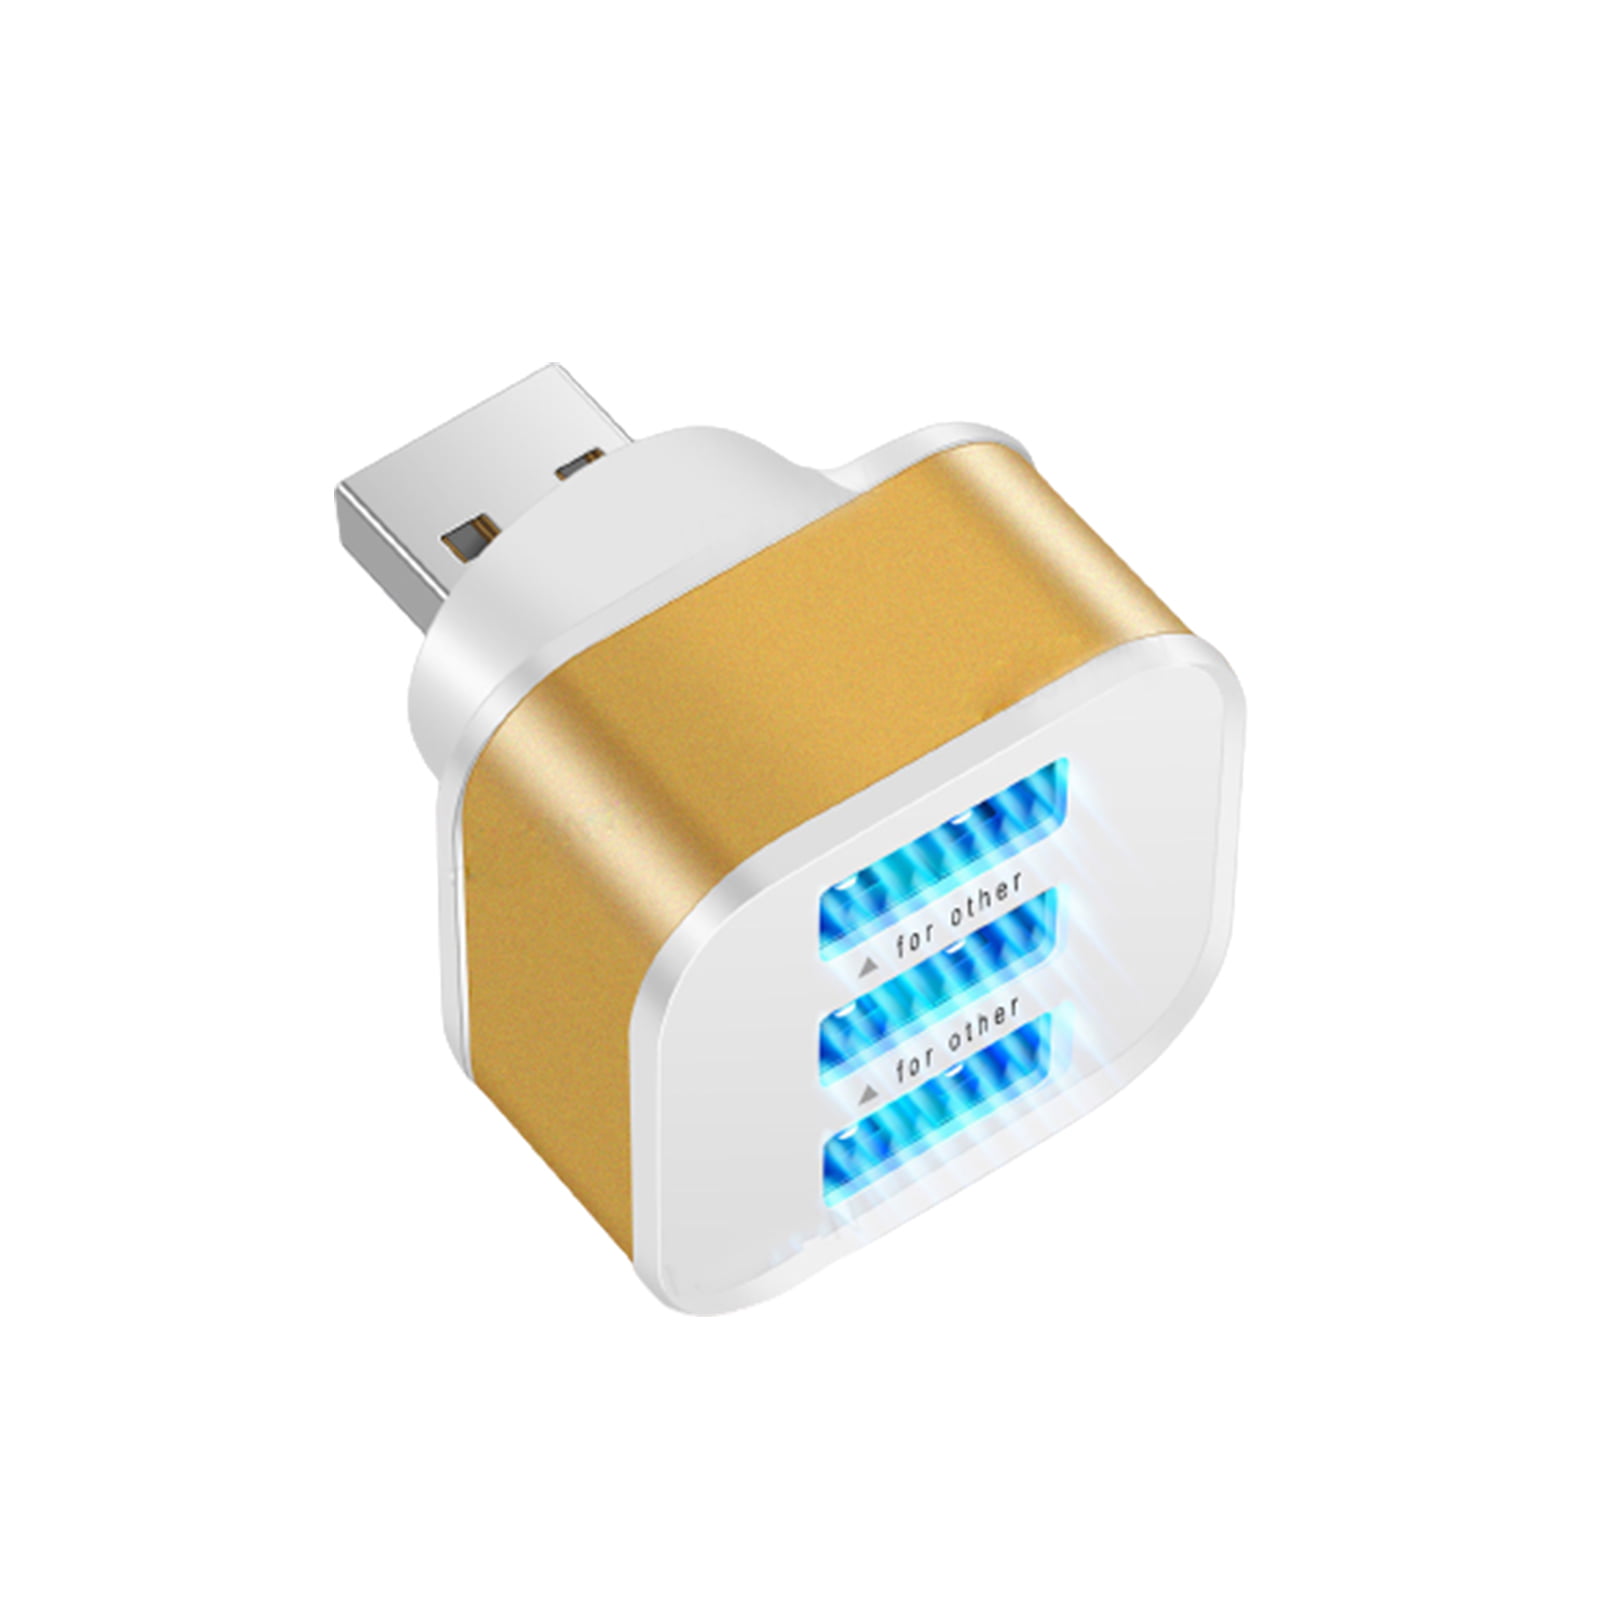 Taize Portable 3-in-1 LED Light Cable Splitter Hub Adapter for Phone PC Walmart.com